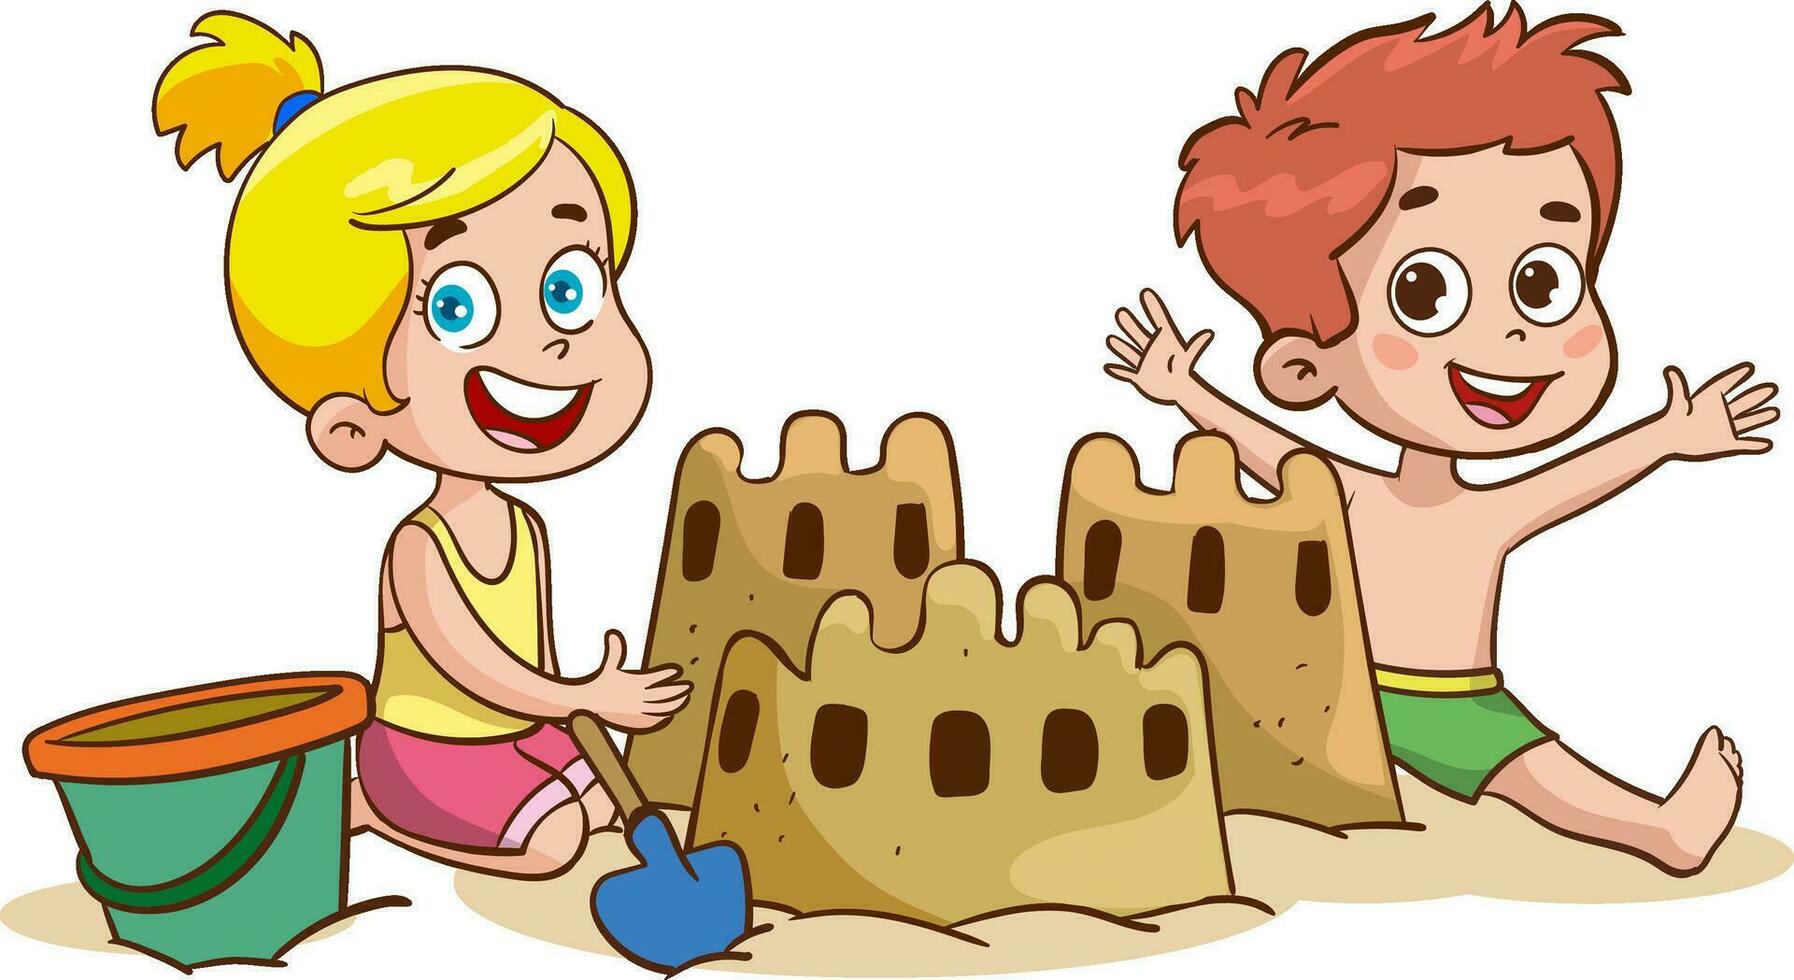 Children making sand castle at the beach vector